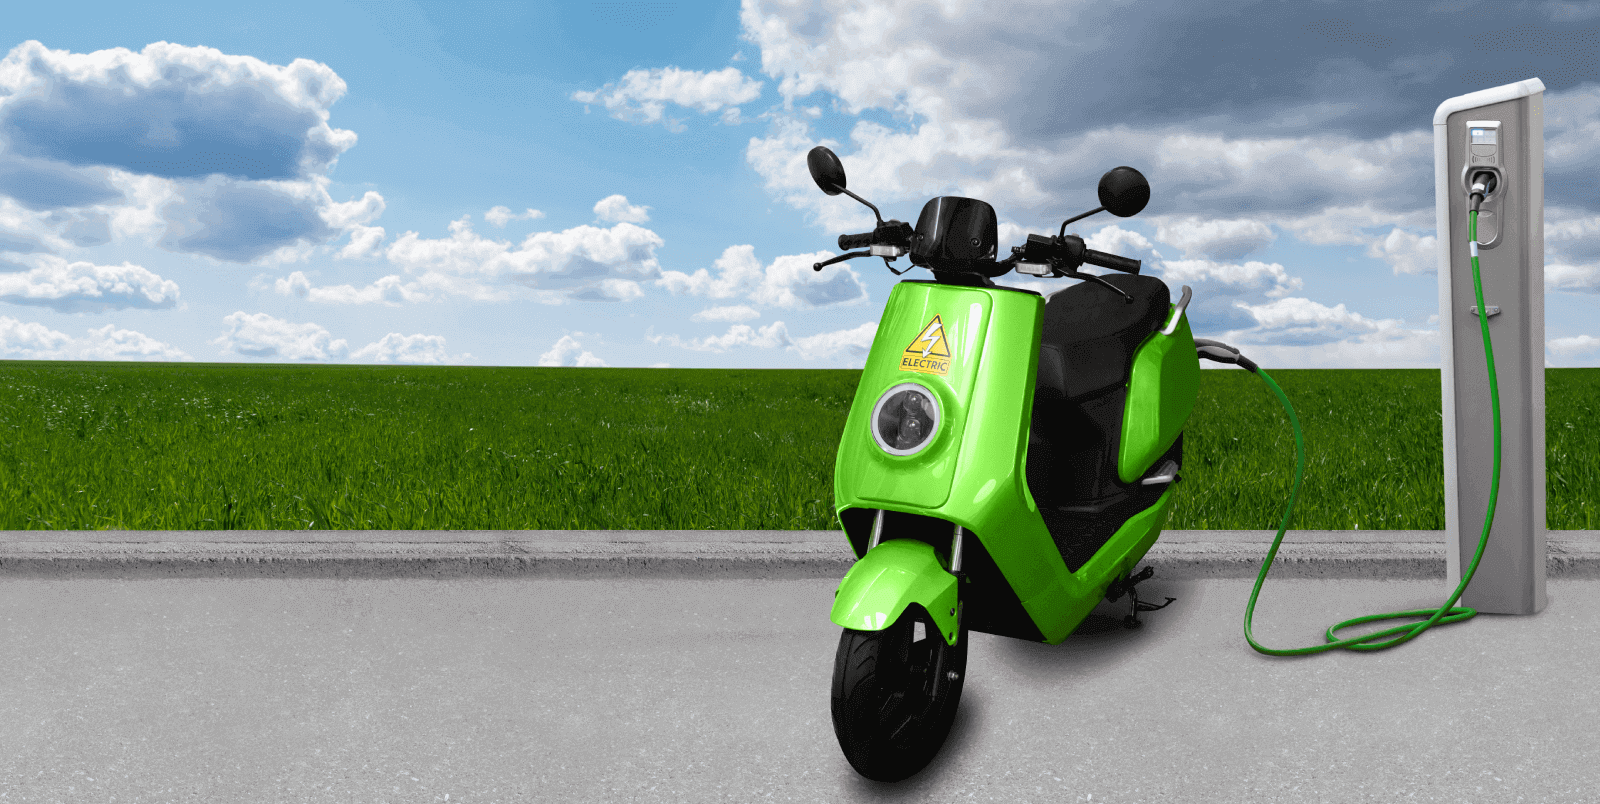 Top Choices for Budget-Friendly Electric Bikes in 2022